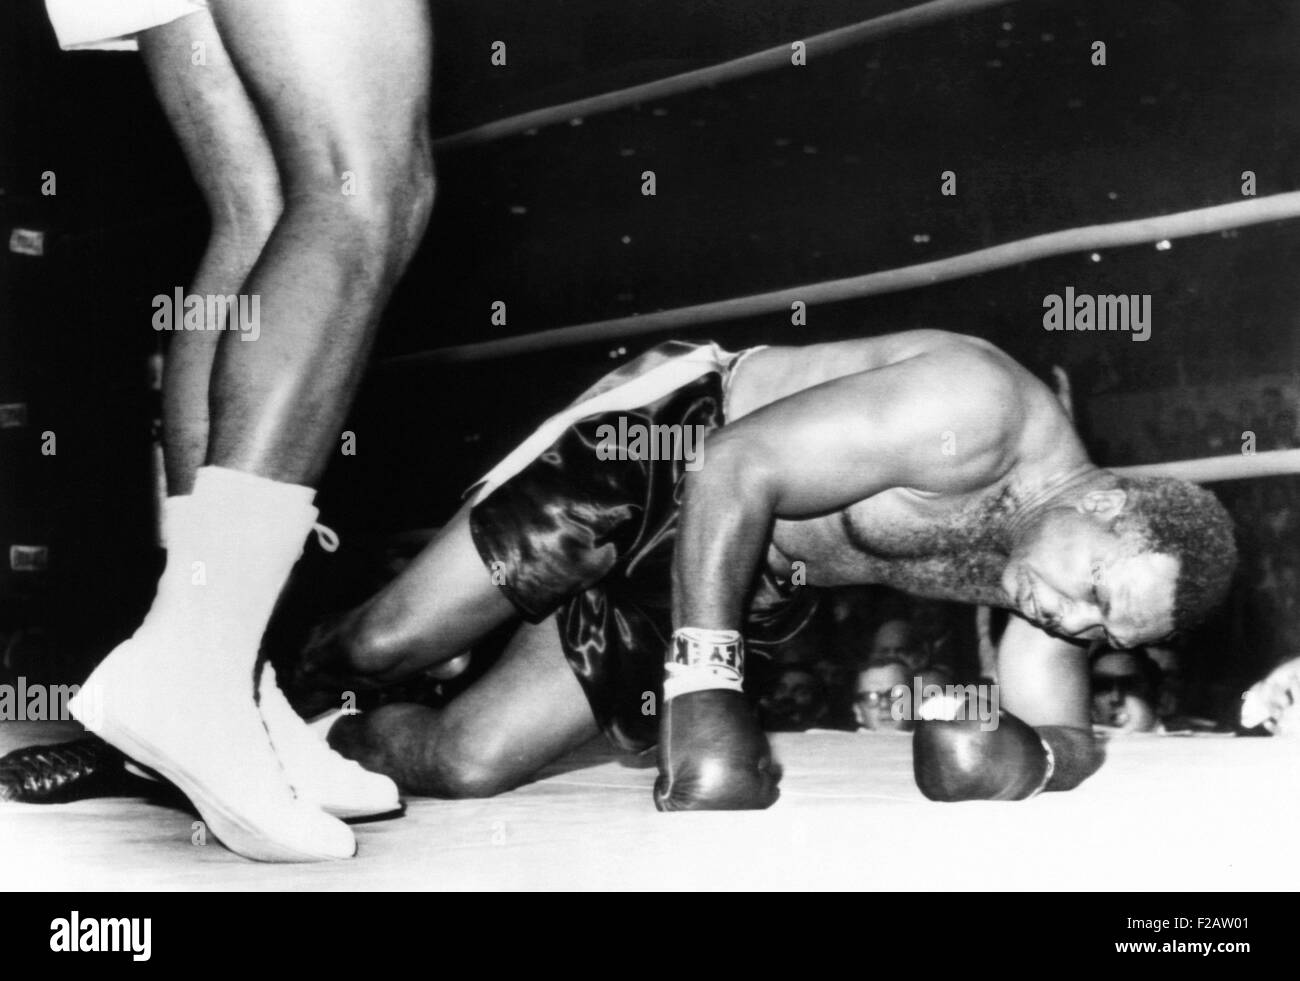 Archie Moore on the canvas in the fourth round of his fight with 20 year old Cassius Clay. Nov. 15, 1962. It was one of three knockdowns that spelled the 48 year old Moore's defeat and Clay's 16th consecutive professional victory. Clay (a.k.a. Muhammed Ali) predicted he would stop Moore in four rounds, and he knocked Moore down three times in the fourth round. (CSU 2015 11 1528) Stock Photo